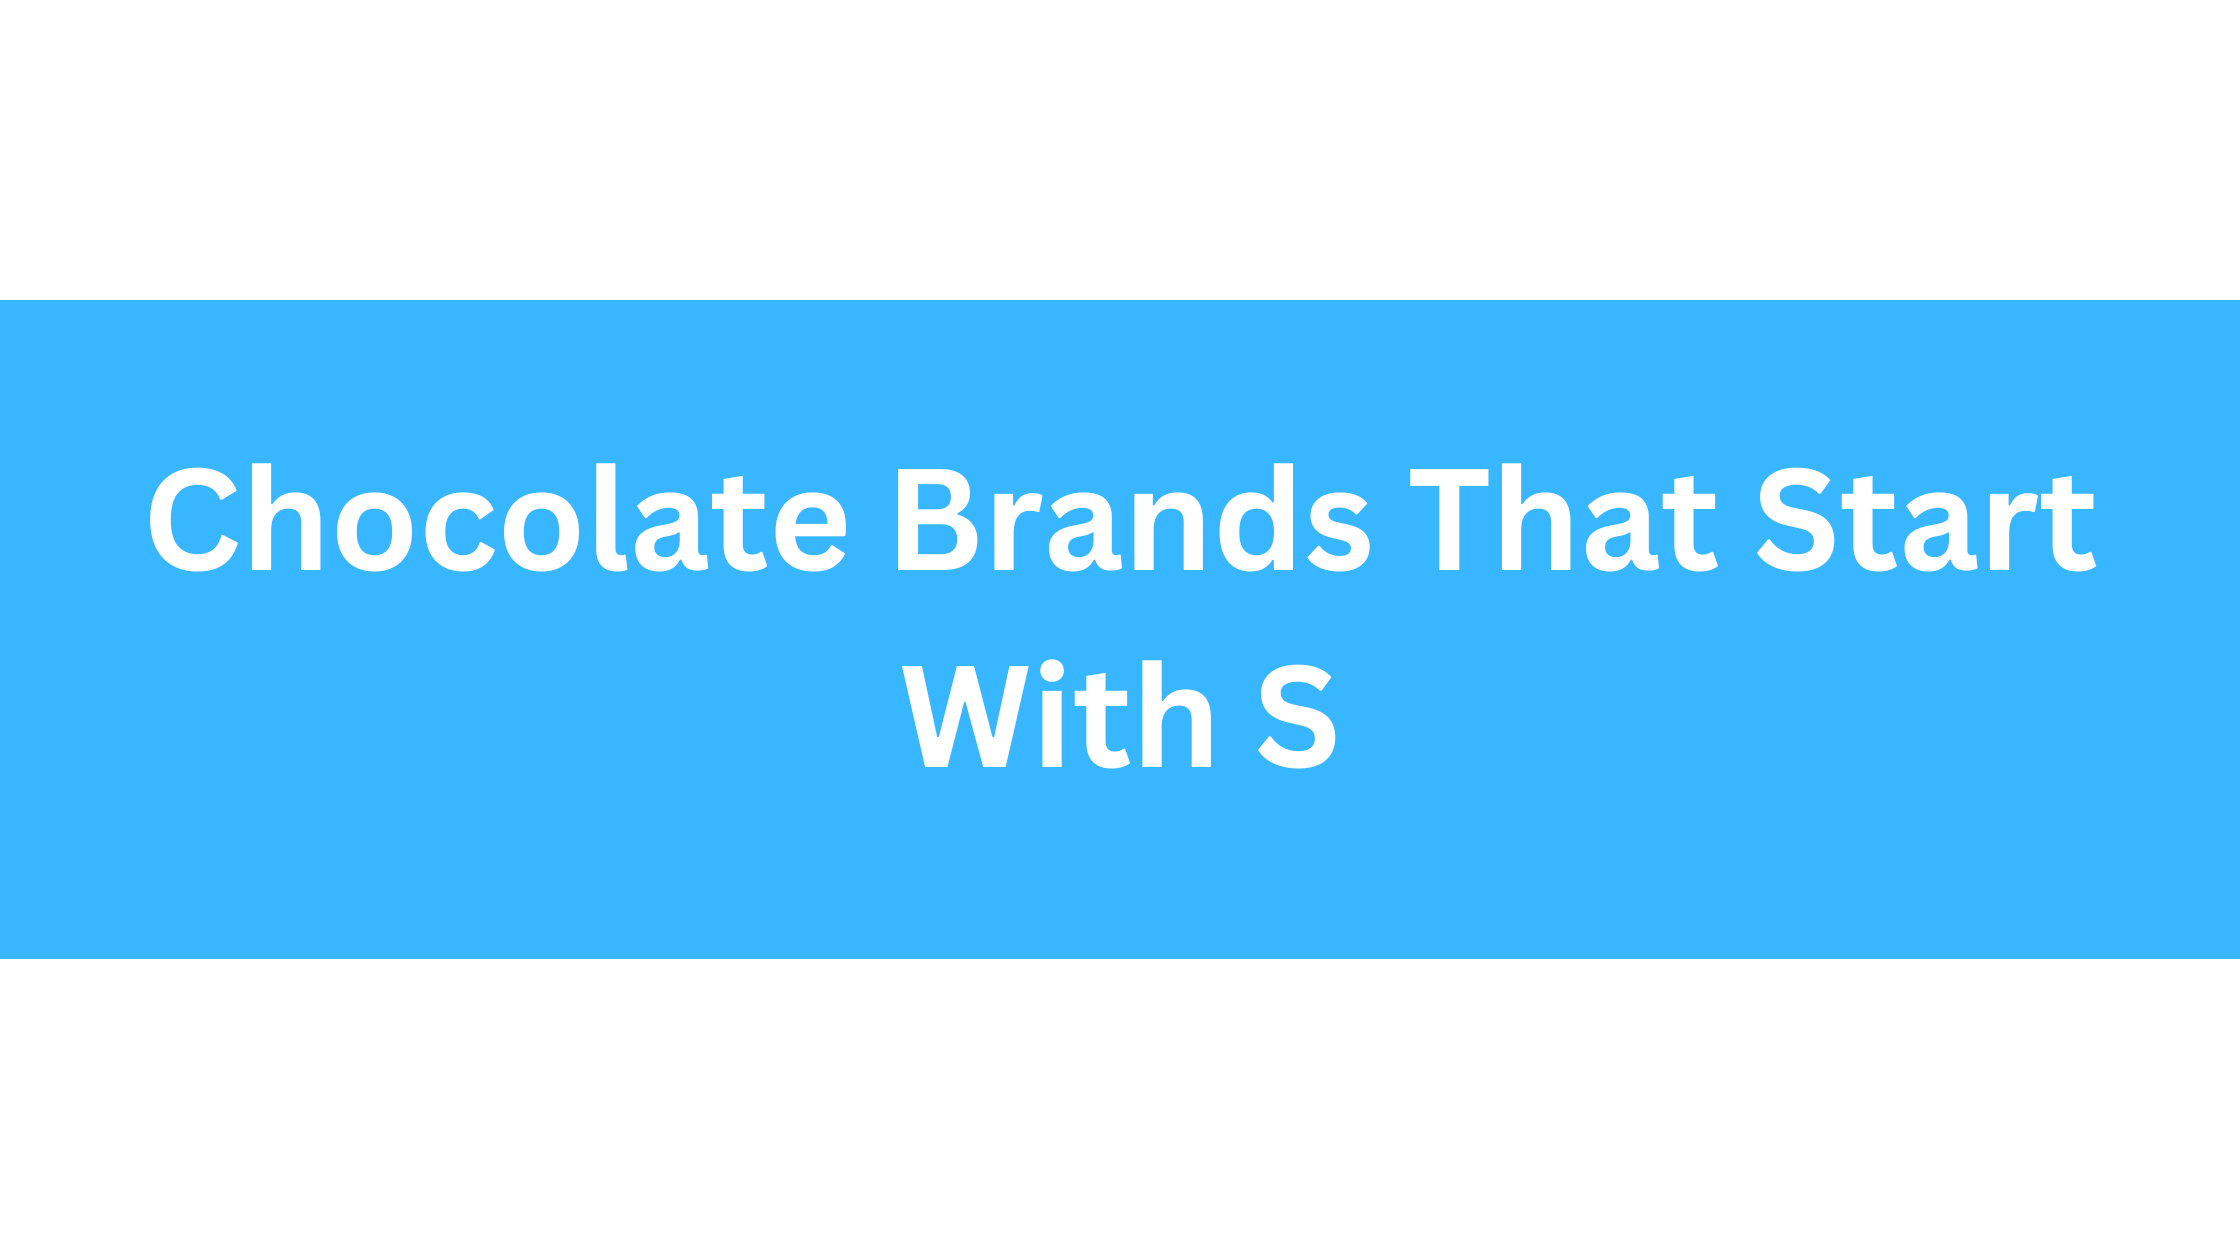 Chocolate Brands That Start With S